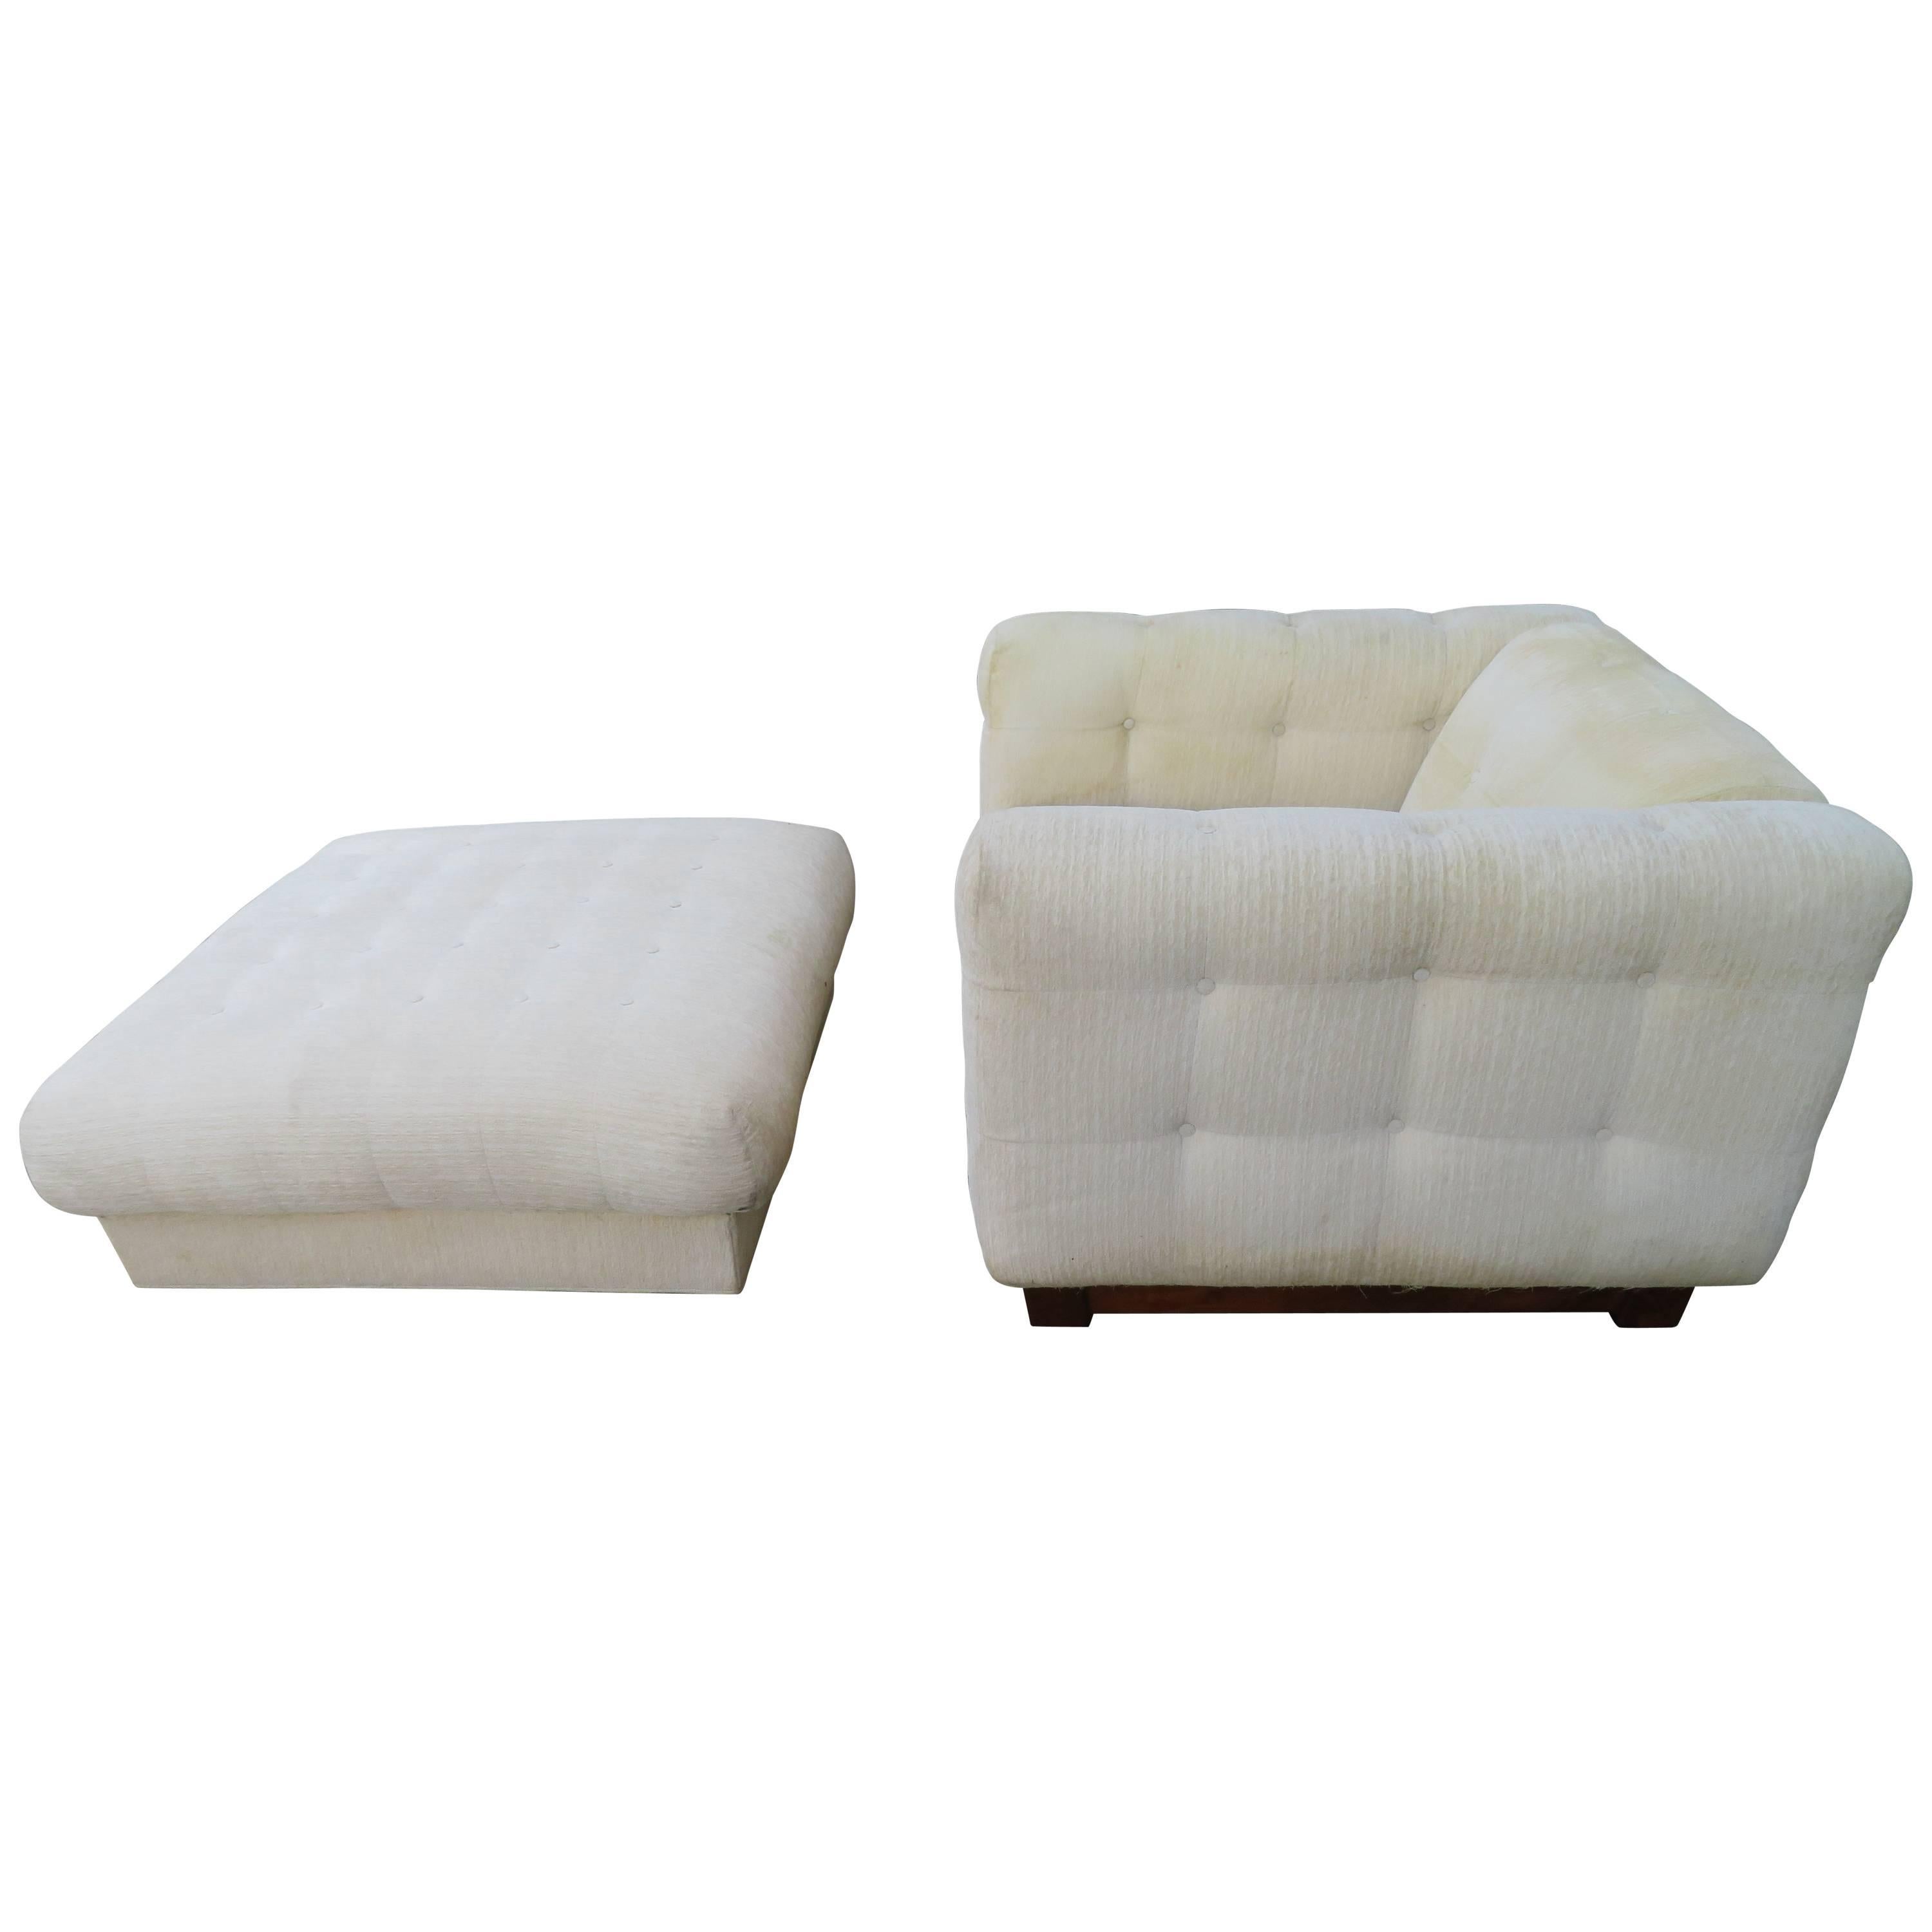 Unusual Milo Baughman Style Tufted Cube Lounge Chair with Matching Ottoman For Sale